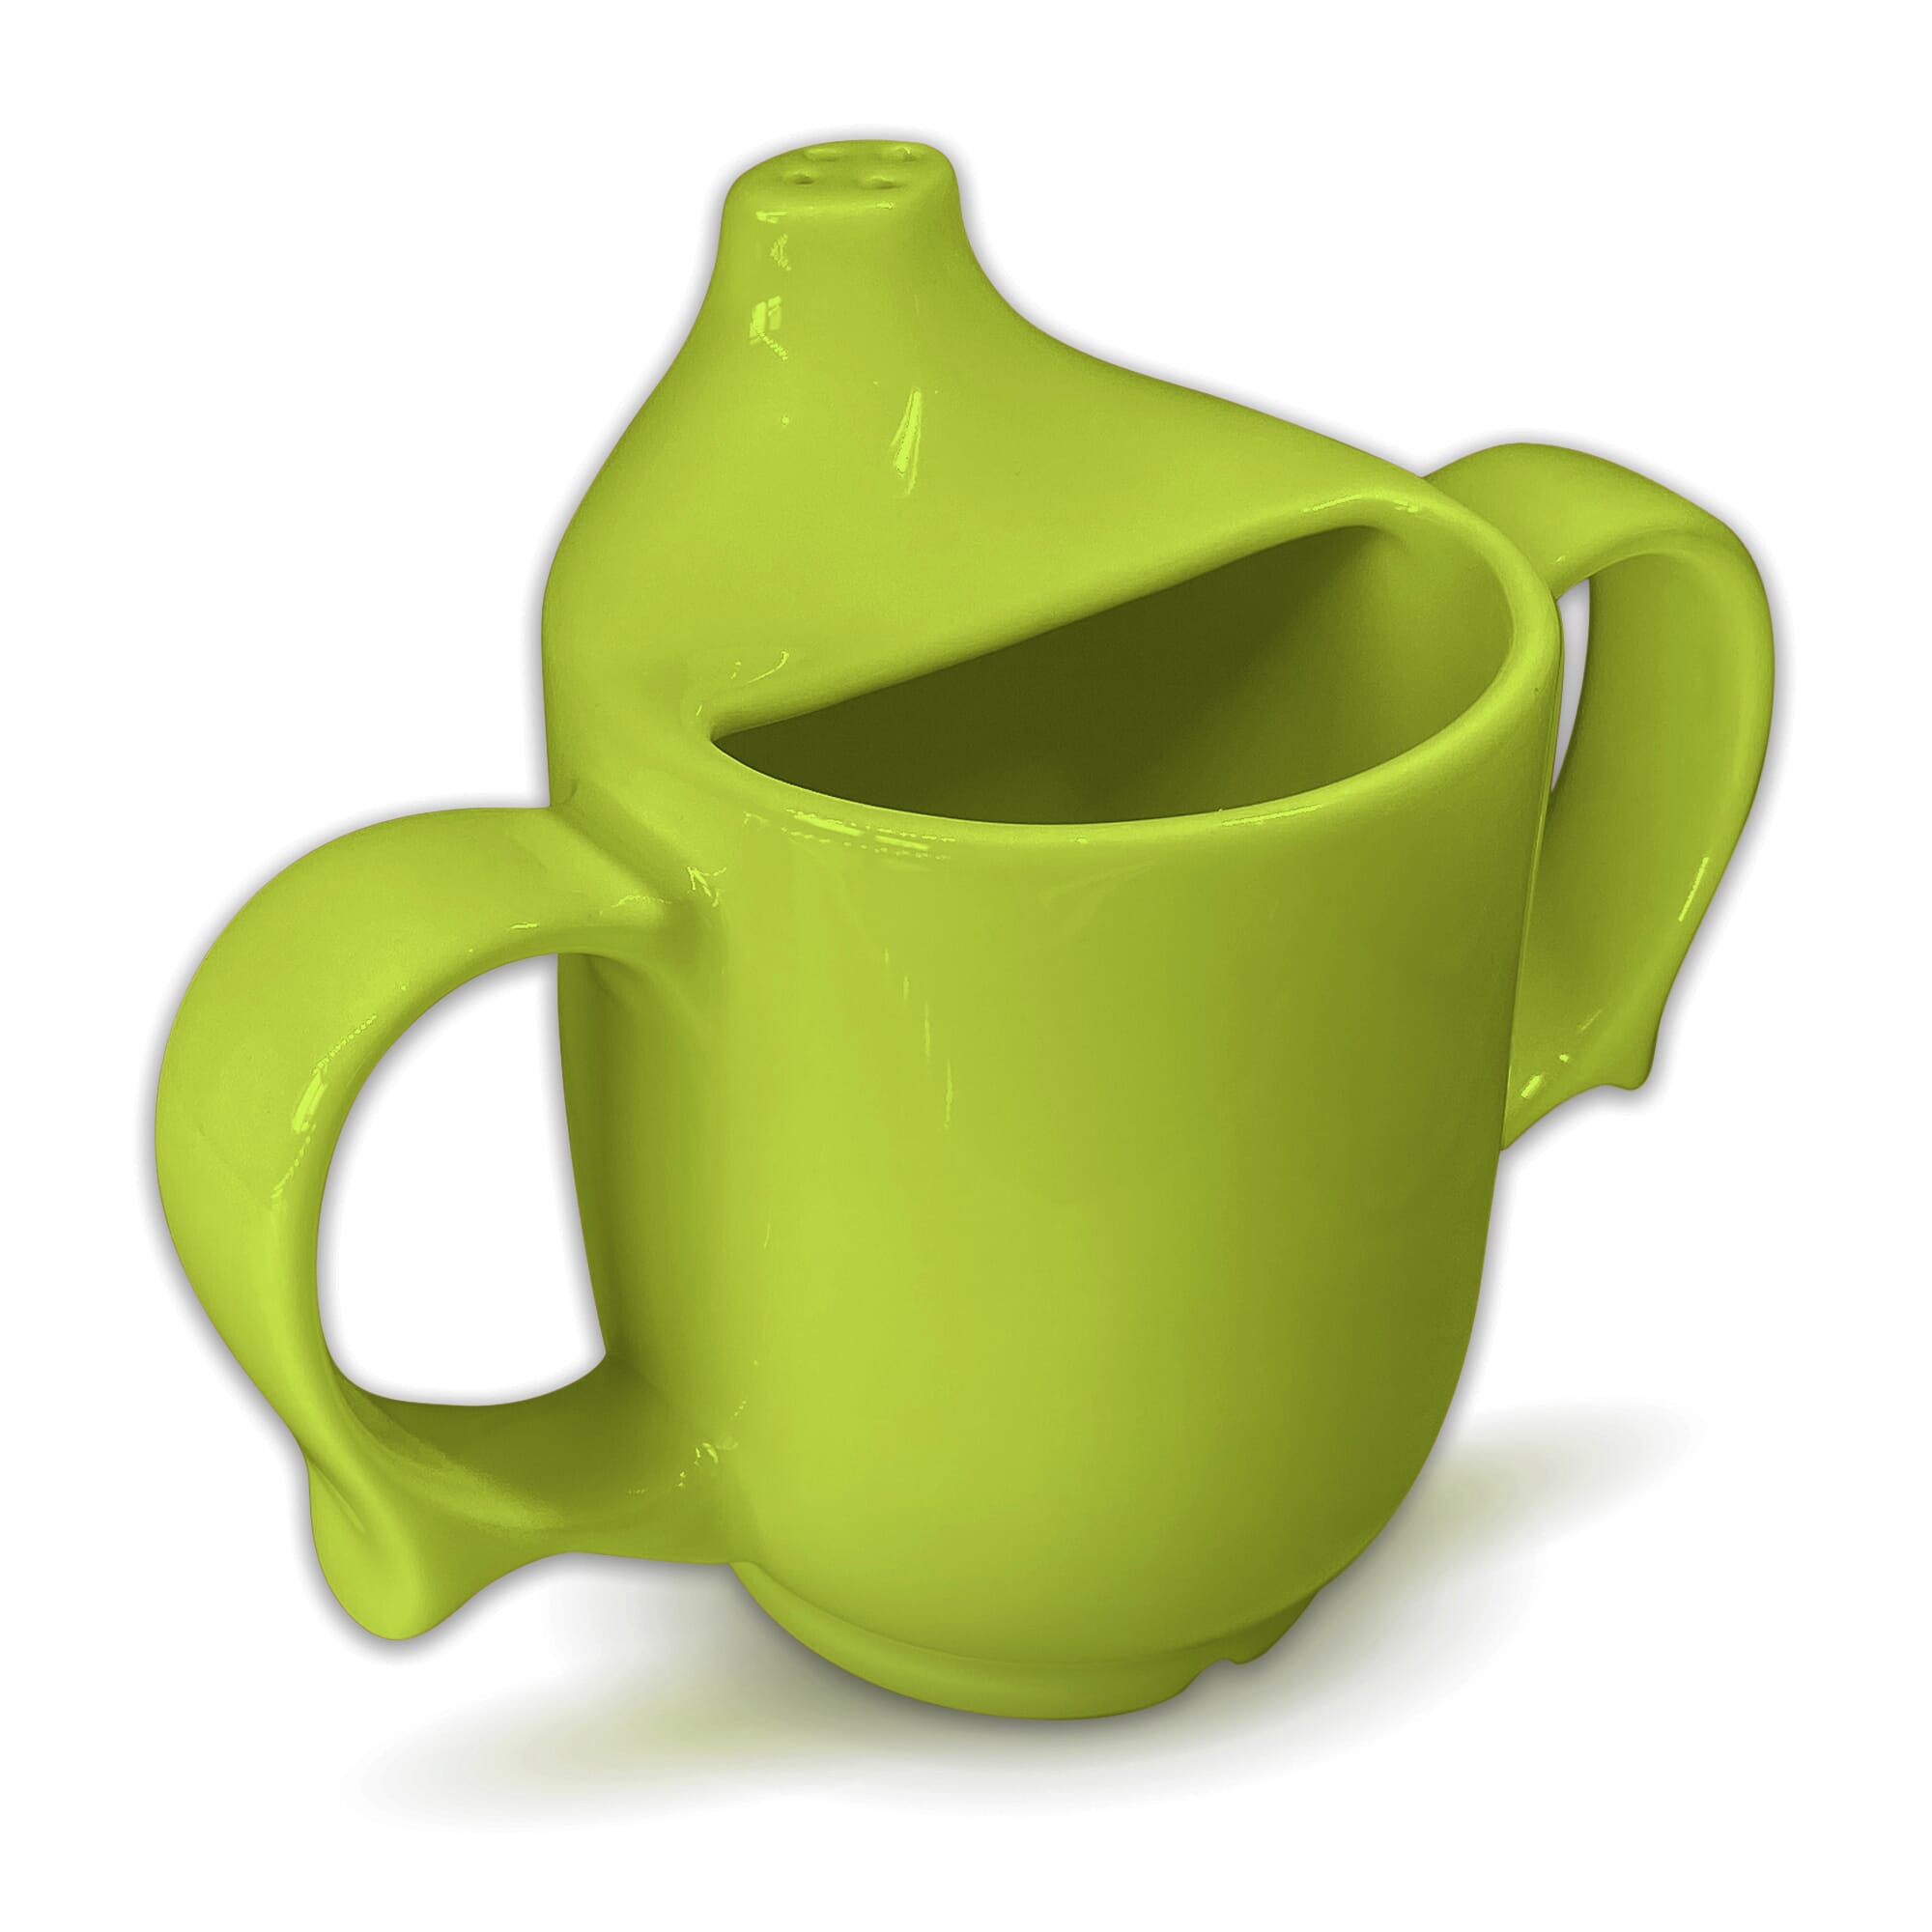 View Dignity Two Handled Drinking Cup Green information